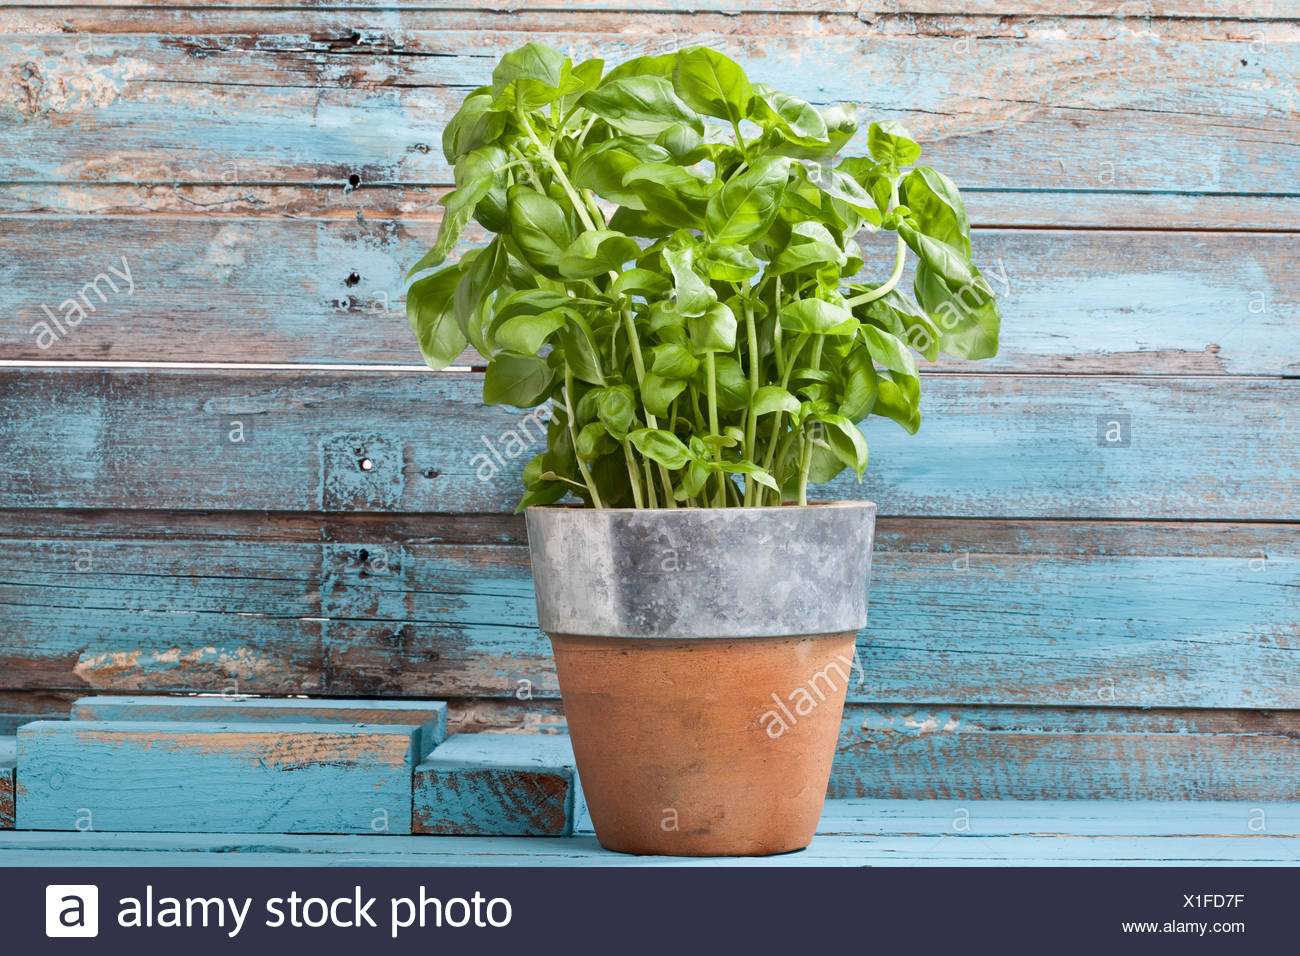 Image result for plant in pot stock image